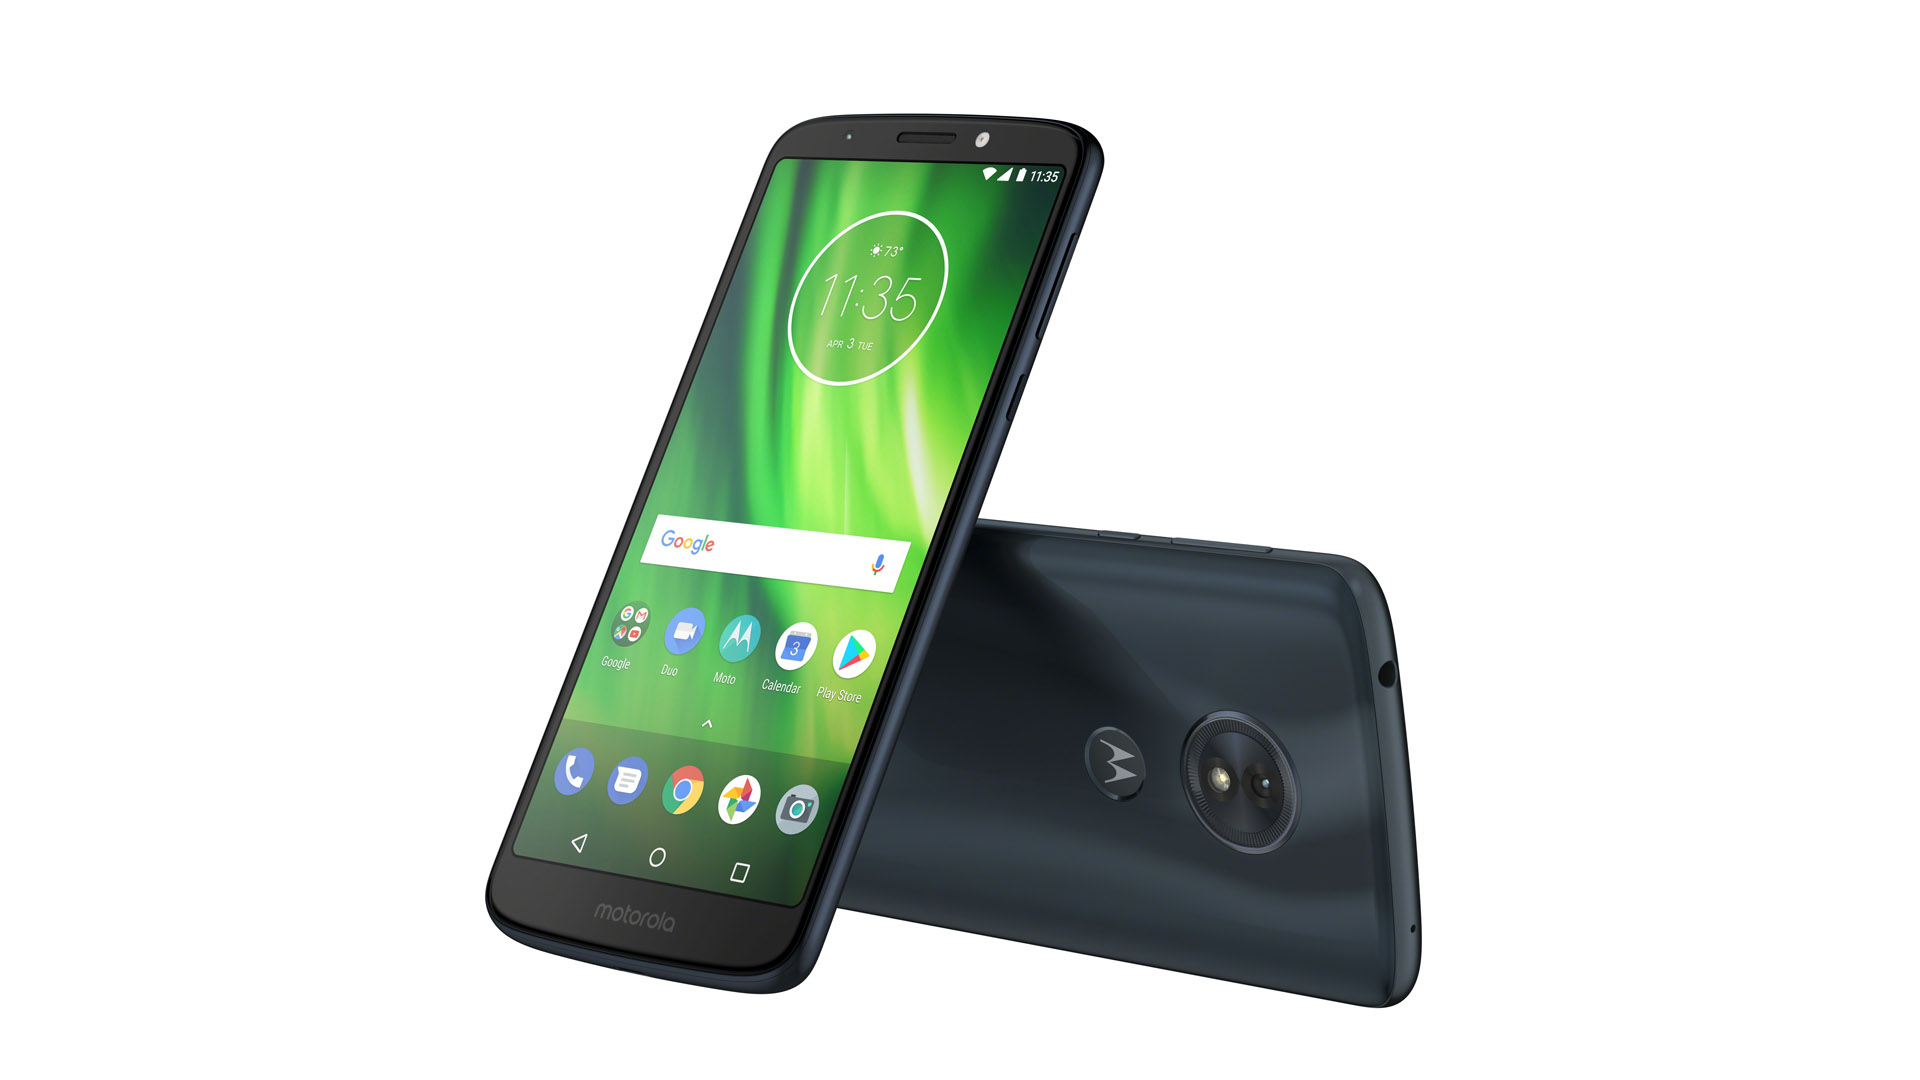 Not a compatible device for Android Auto; Leaf 2018, phone is Moto G6 Plus,  stock cable? : r/leaf